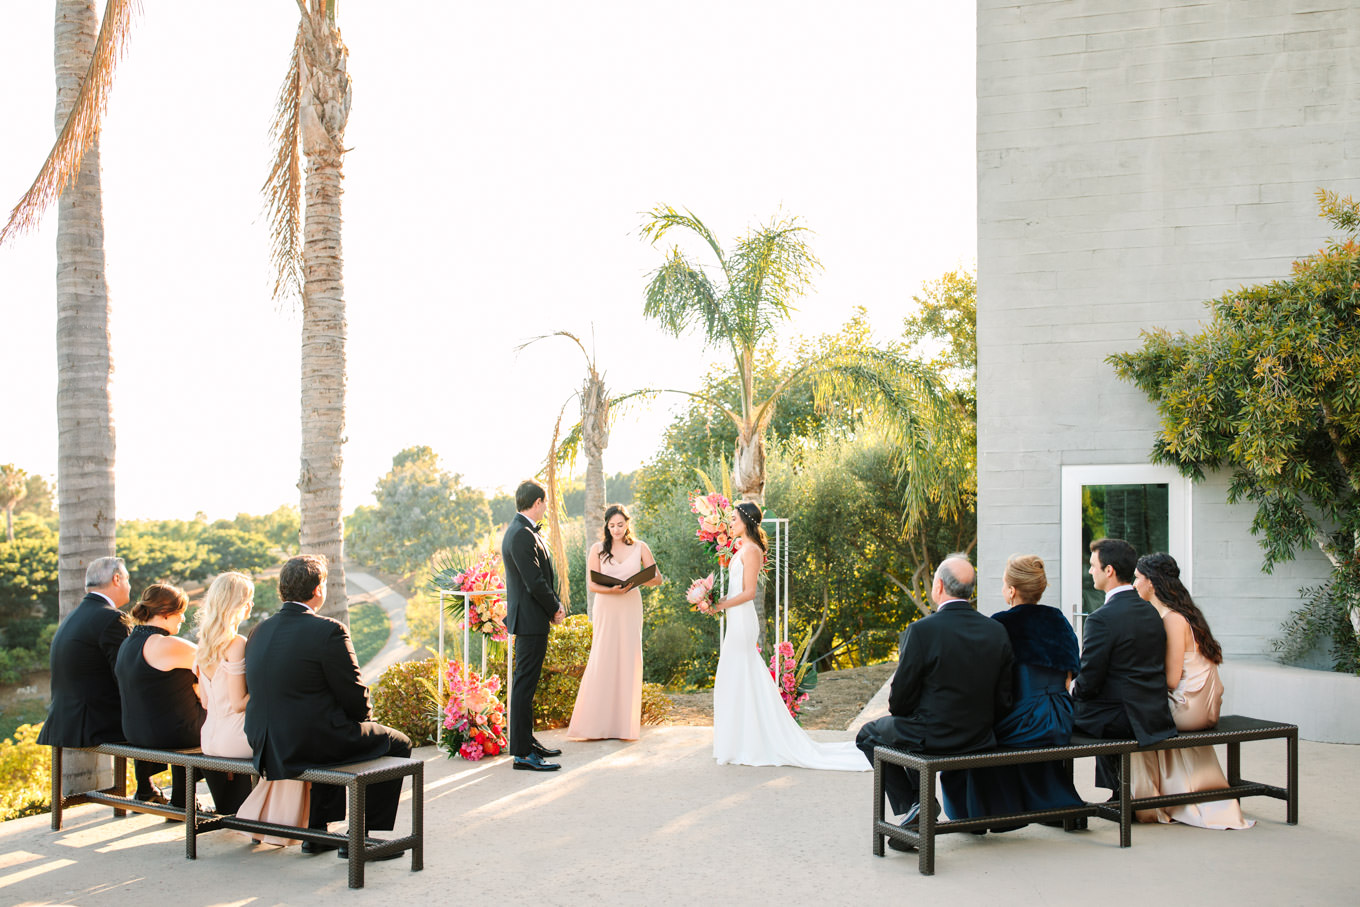 Micro wedding at private residence in Malibu | Engagement, elopement, and wedding photography roundup of Mary Costa’s favorite images from 2020 | Colorful and elevated photography for fun-loving couples in Southern California | #2020wedding #elopement #weddingphoto #weddingphotography #microwedding   Source: Mary Costa Photography | Los Angeles